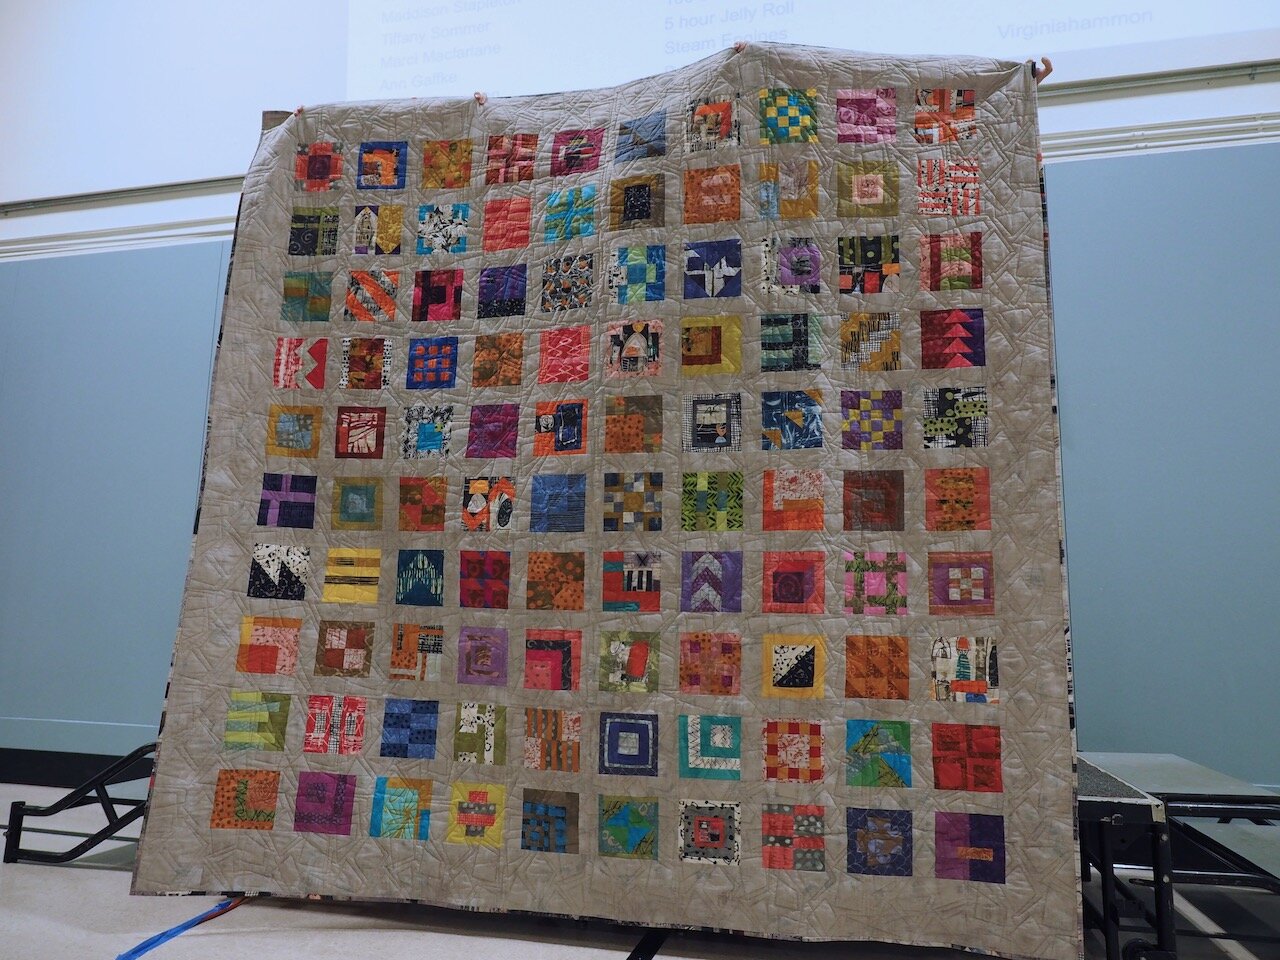 A Quilt for Me by Cris Pera